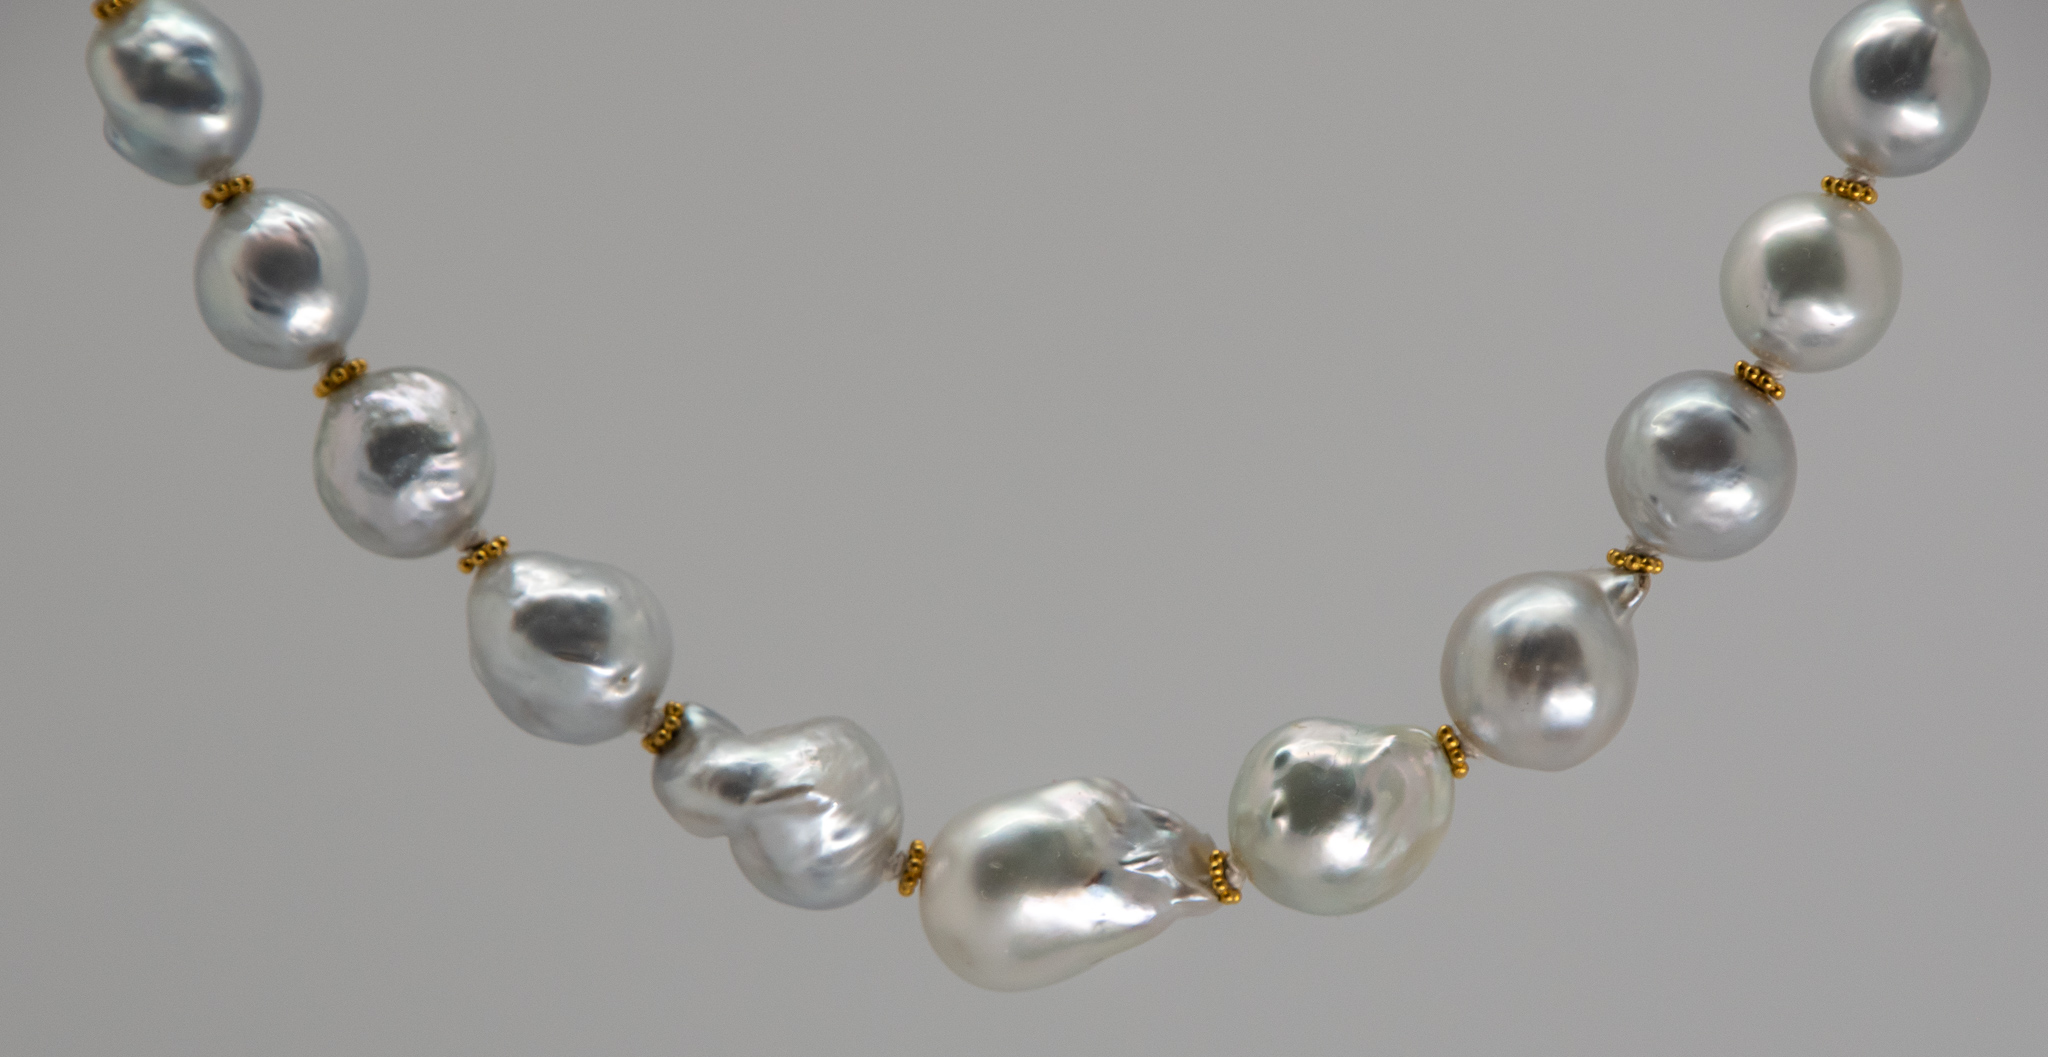 Closeup of central pearls on south sea pearls necklace